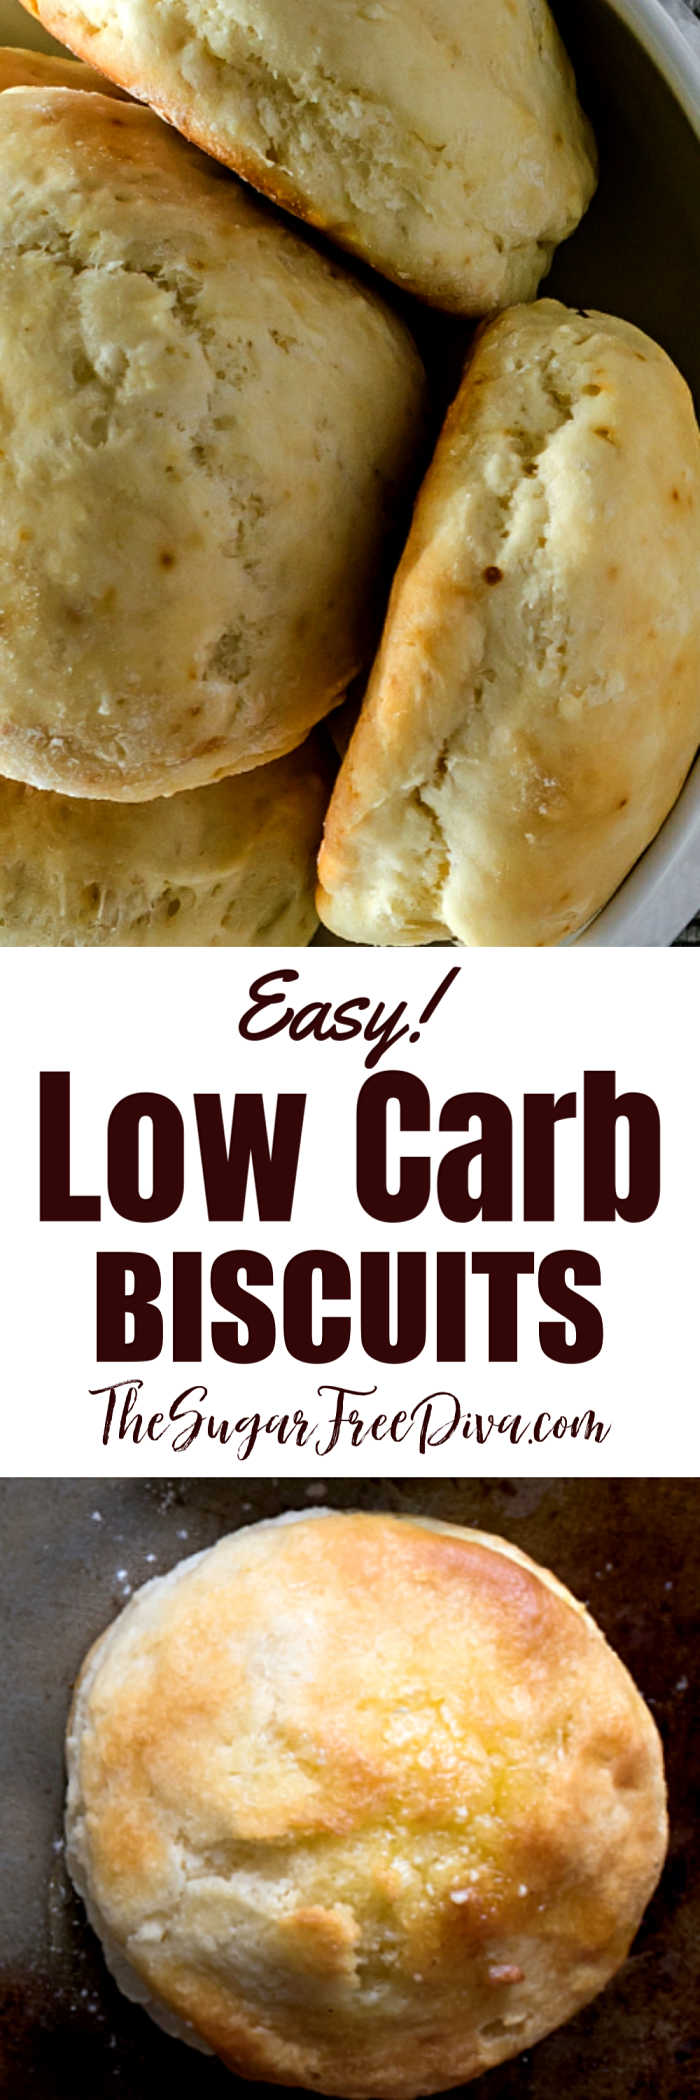 Homemade Low Carb Biscuits The Sugar Free Diva